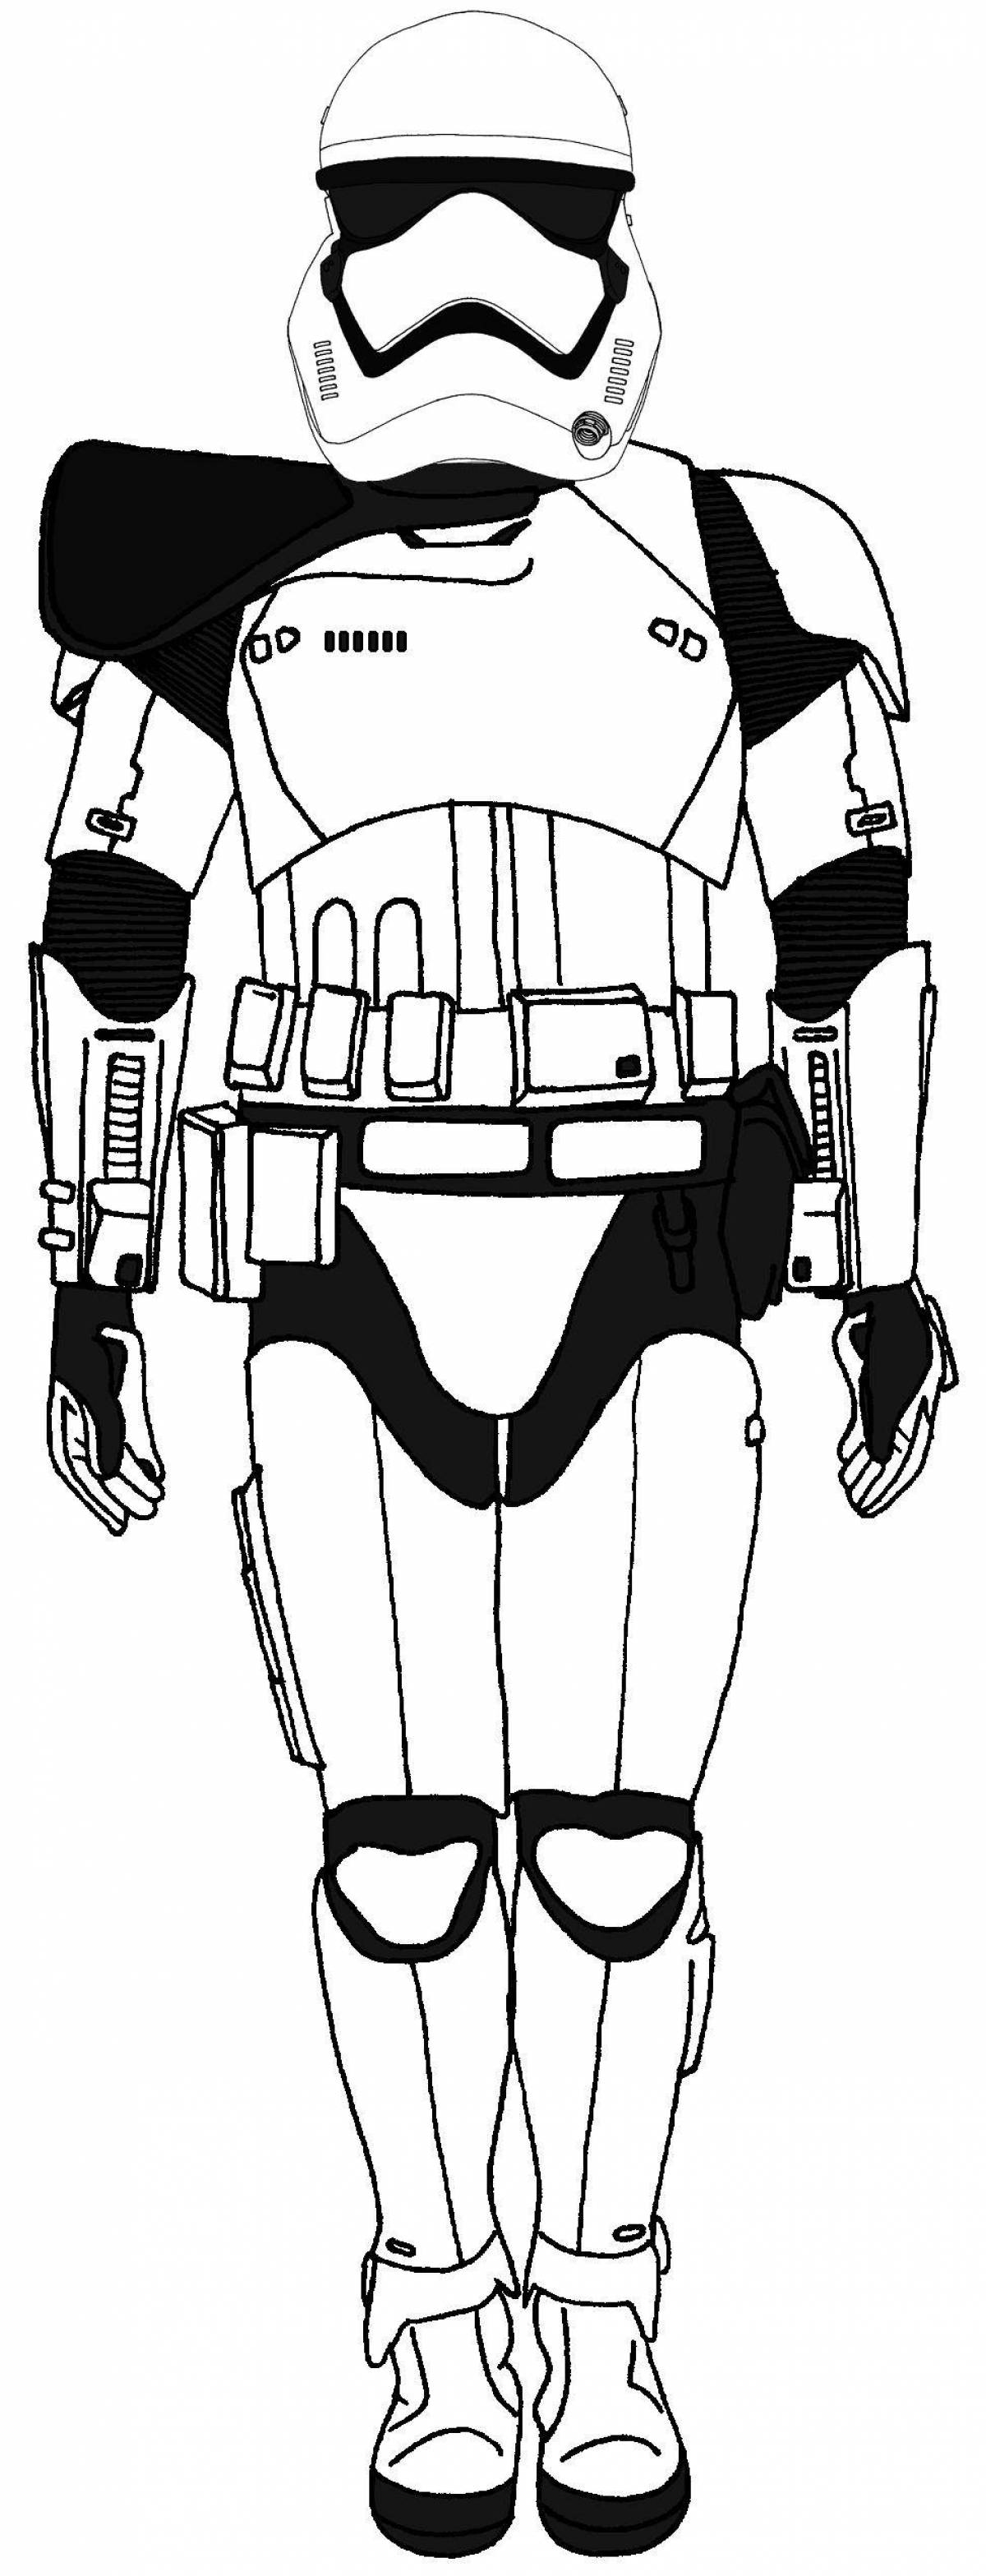 Star Wars Stormtrooper Ultimate Coloring Page